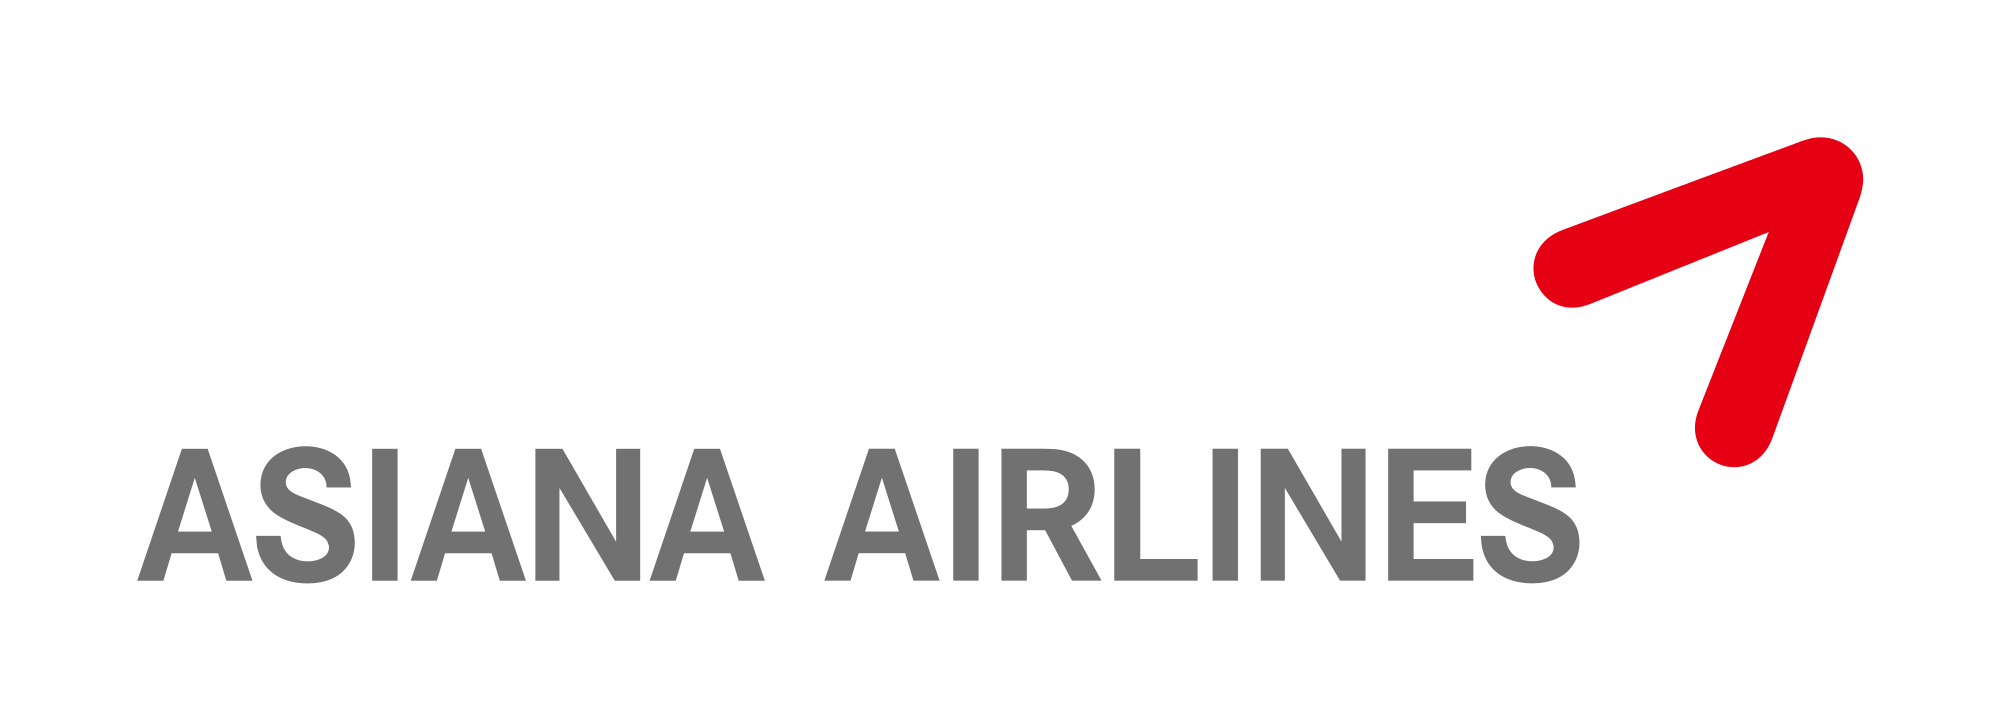 Asia Airlines Logo - Asiana Airlines | Your Travel Corporate